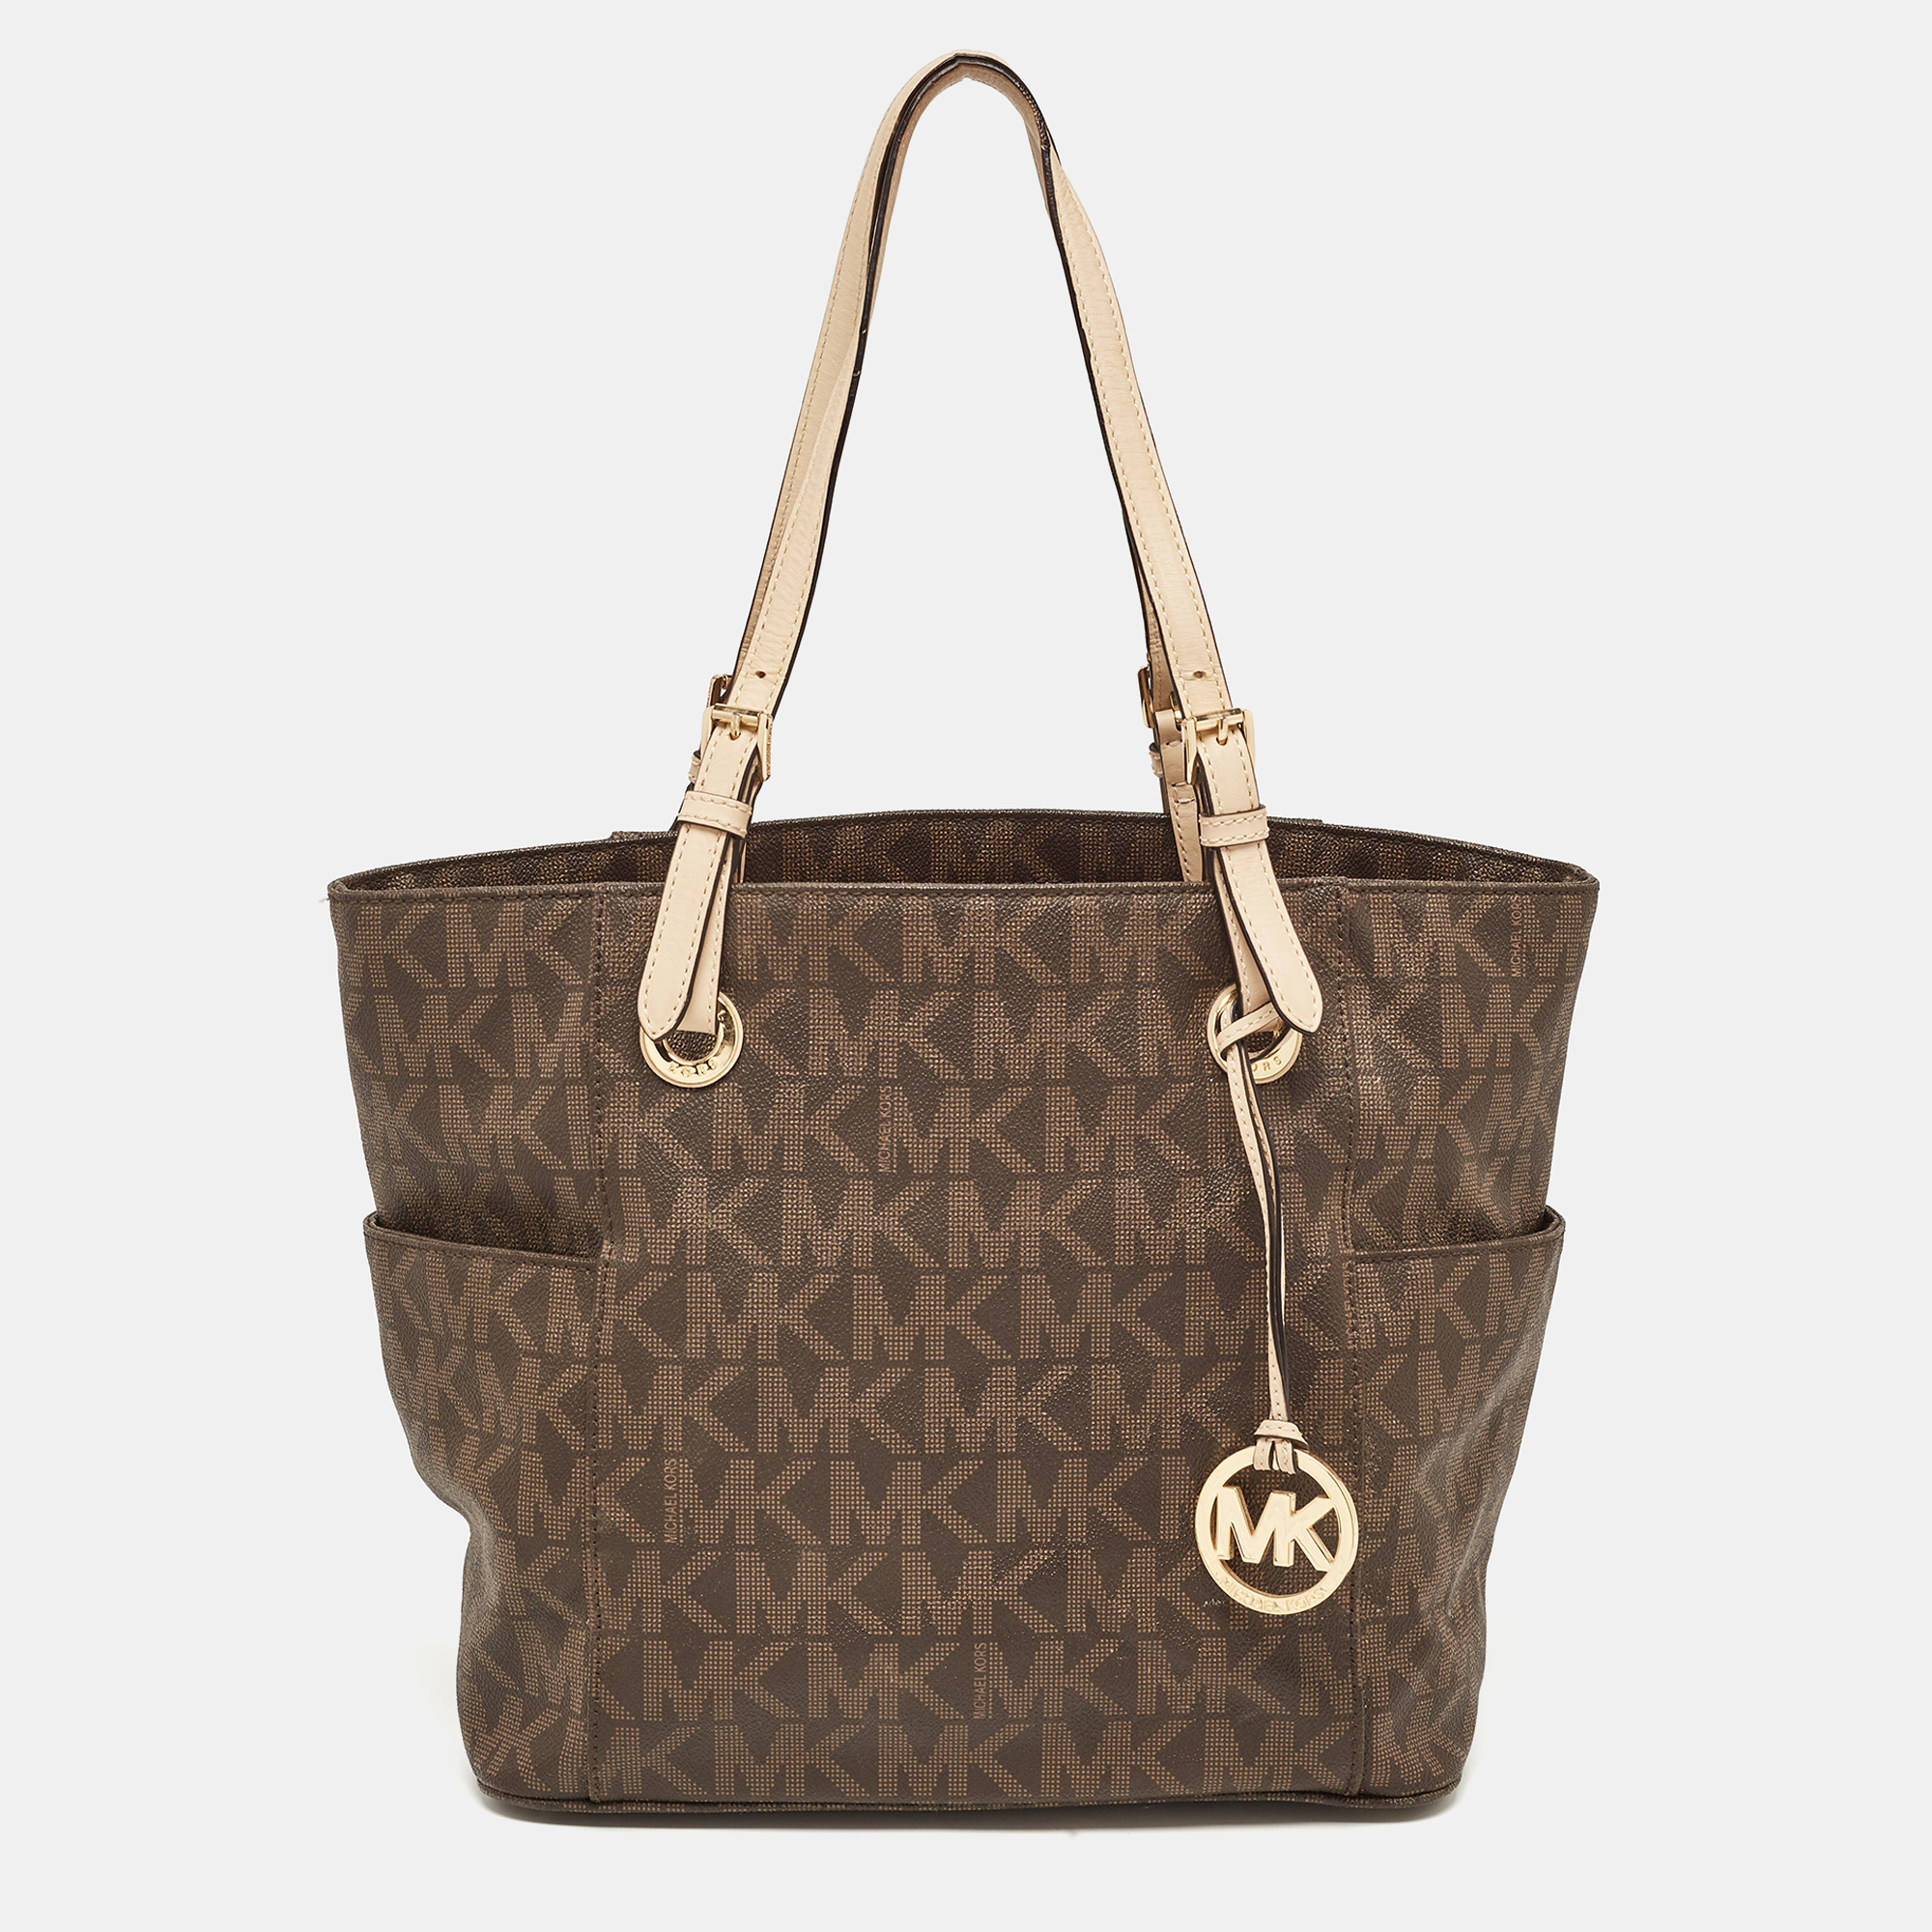 This MICHAEL Michael Kors tote is beautiful in so many ways. From its design to its structure the signature canvas and leather bag exude charm and high fashion. It flaunts two shoulder handles for you to swing and a spacious fabric interior to hold all your essentials.